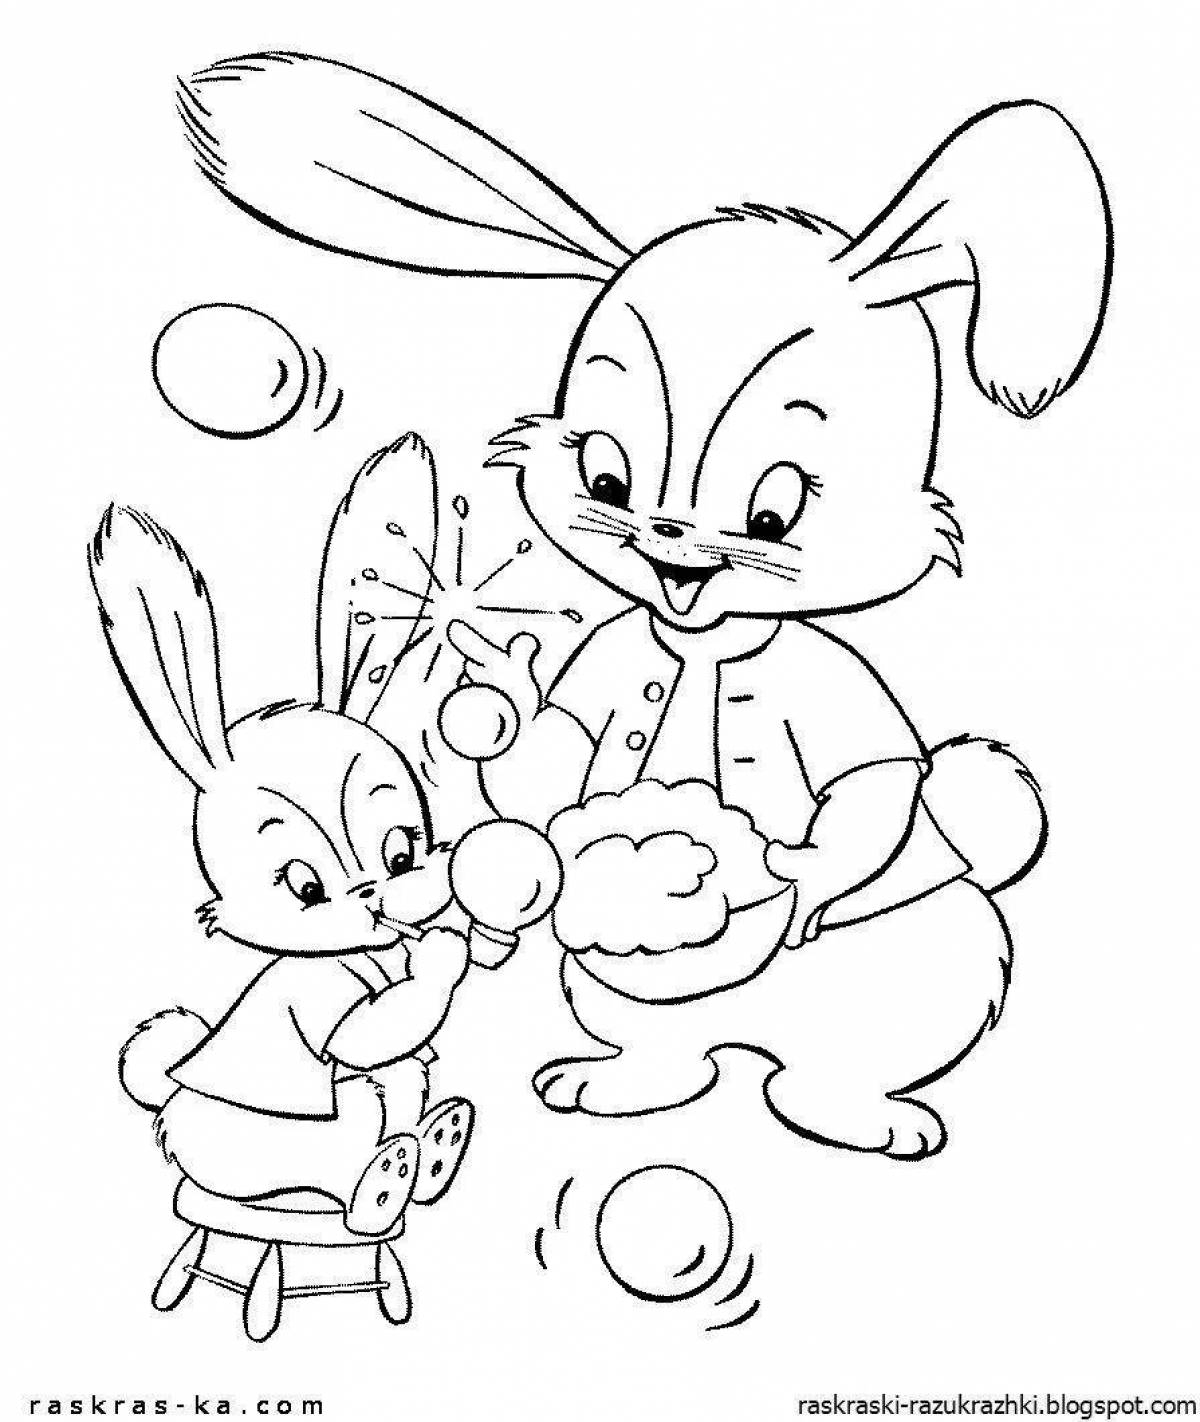 Funny rabbit coloring book